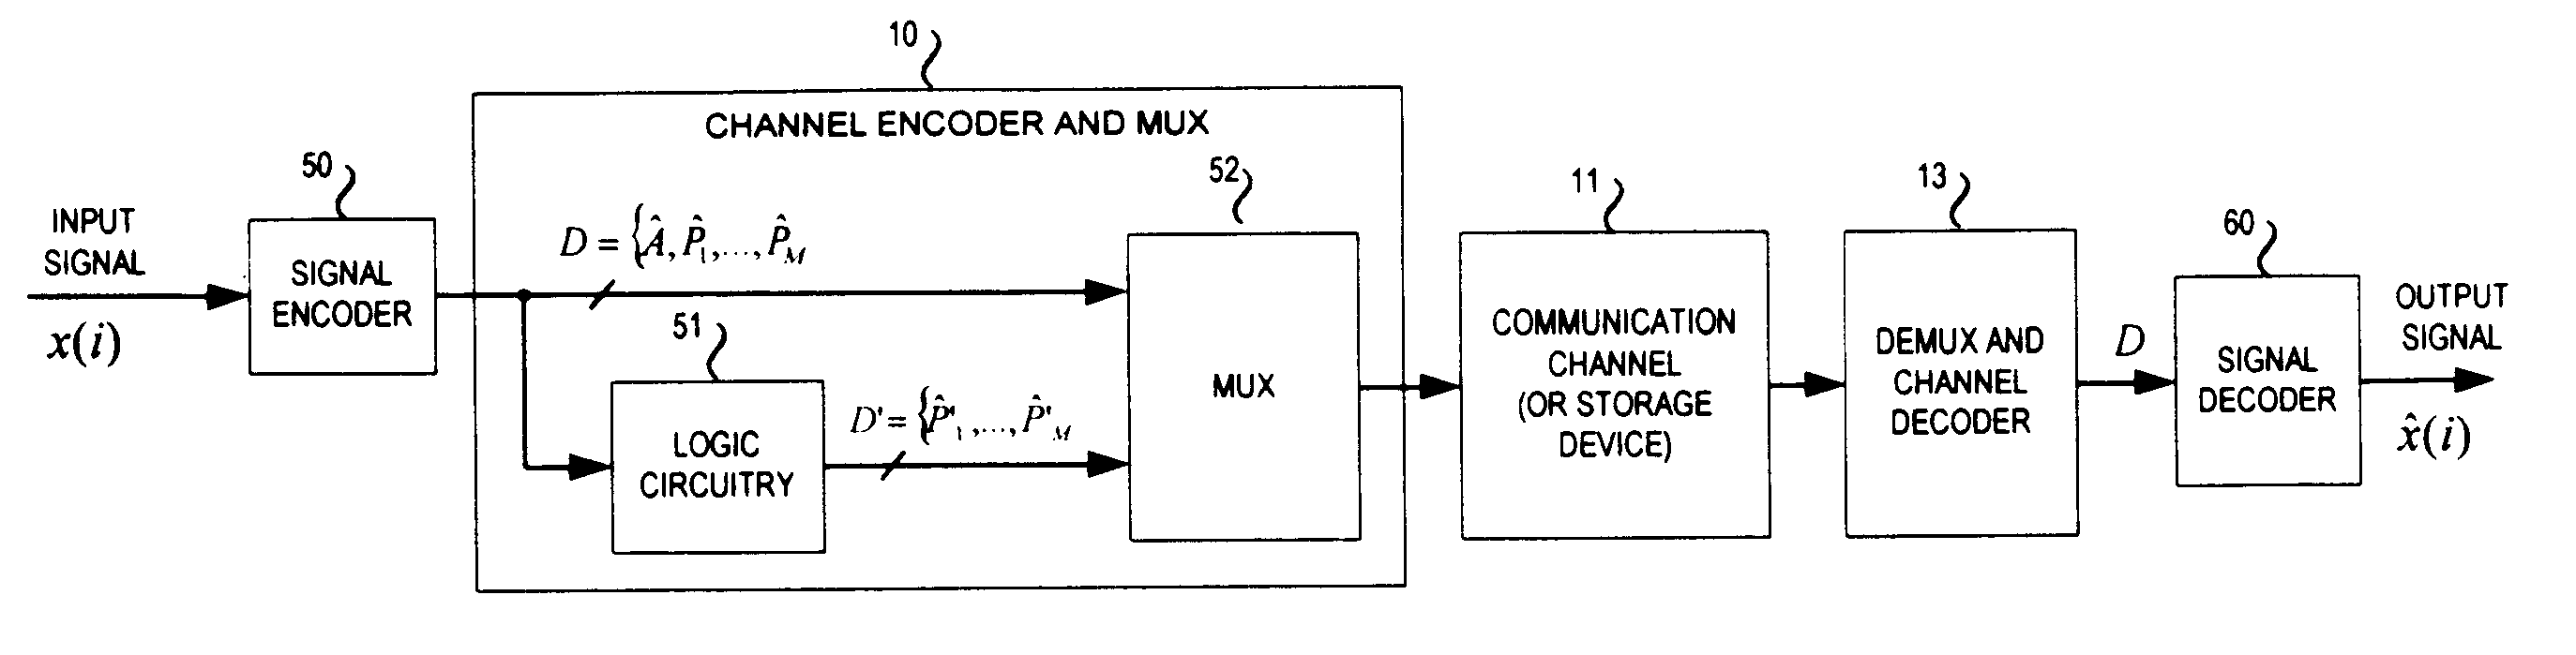 Redundant compression techniques for transmitting data over degraded communication links and/or storing data on media subject to degradation